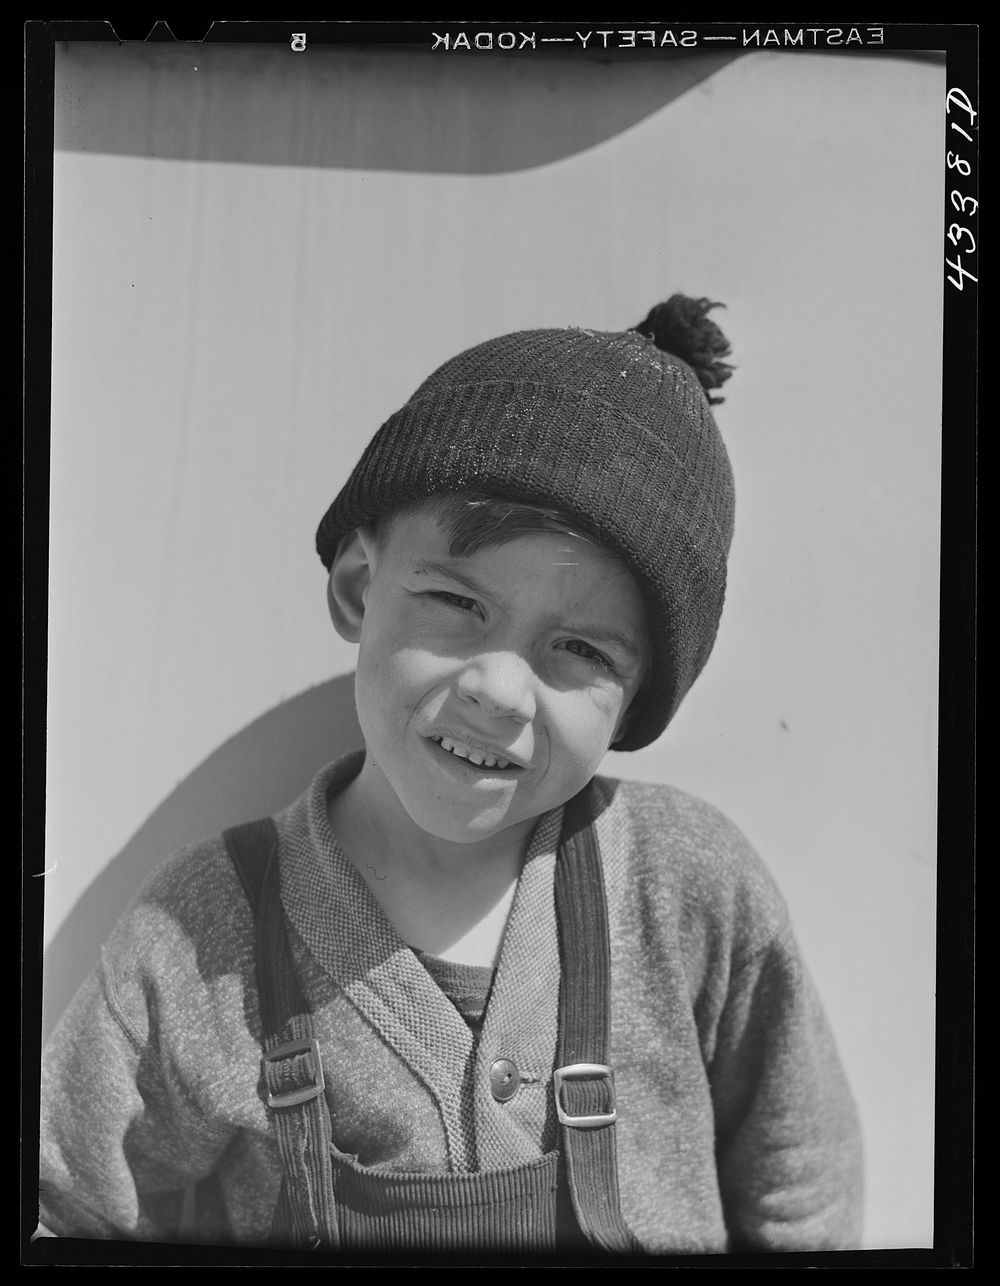 Child of a migratory construction worker living in a trailer settlement near Fort Bragg, North Carolina. Sourced from the…